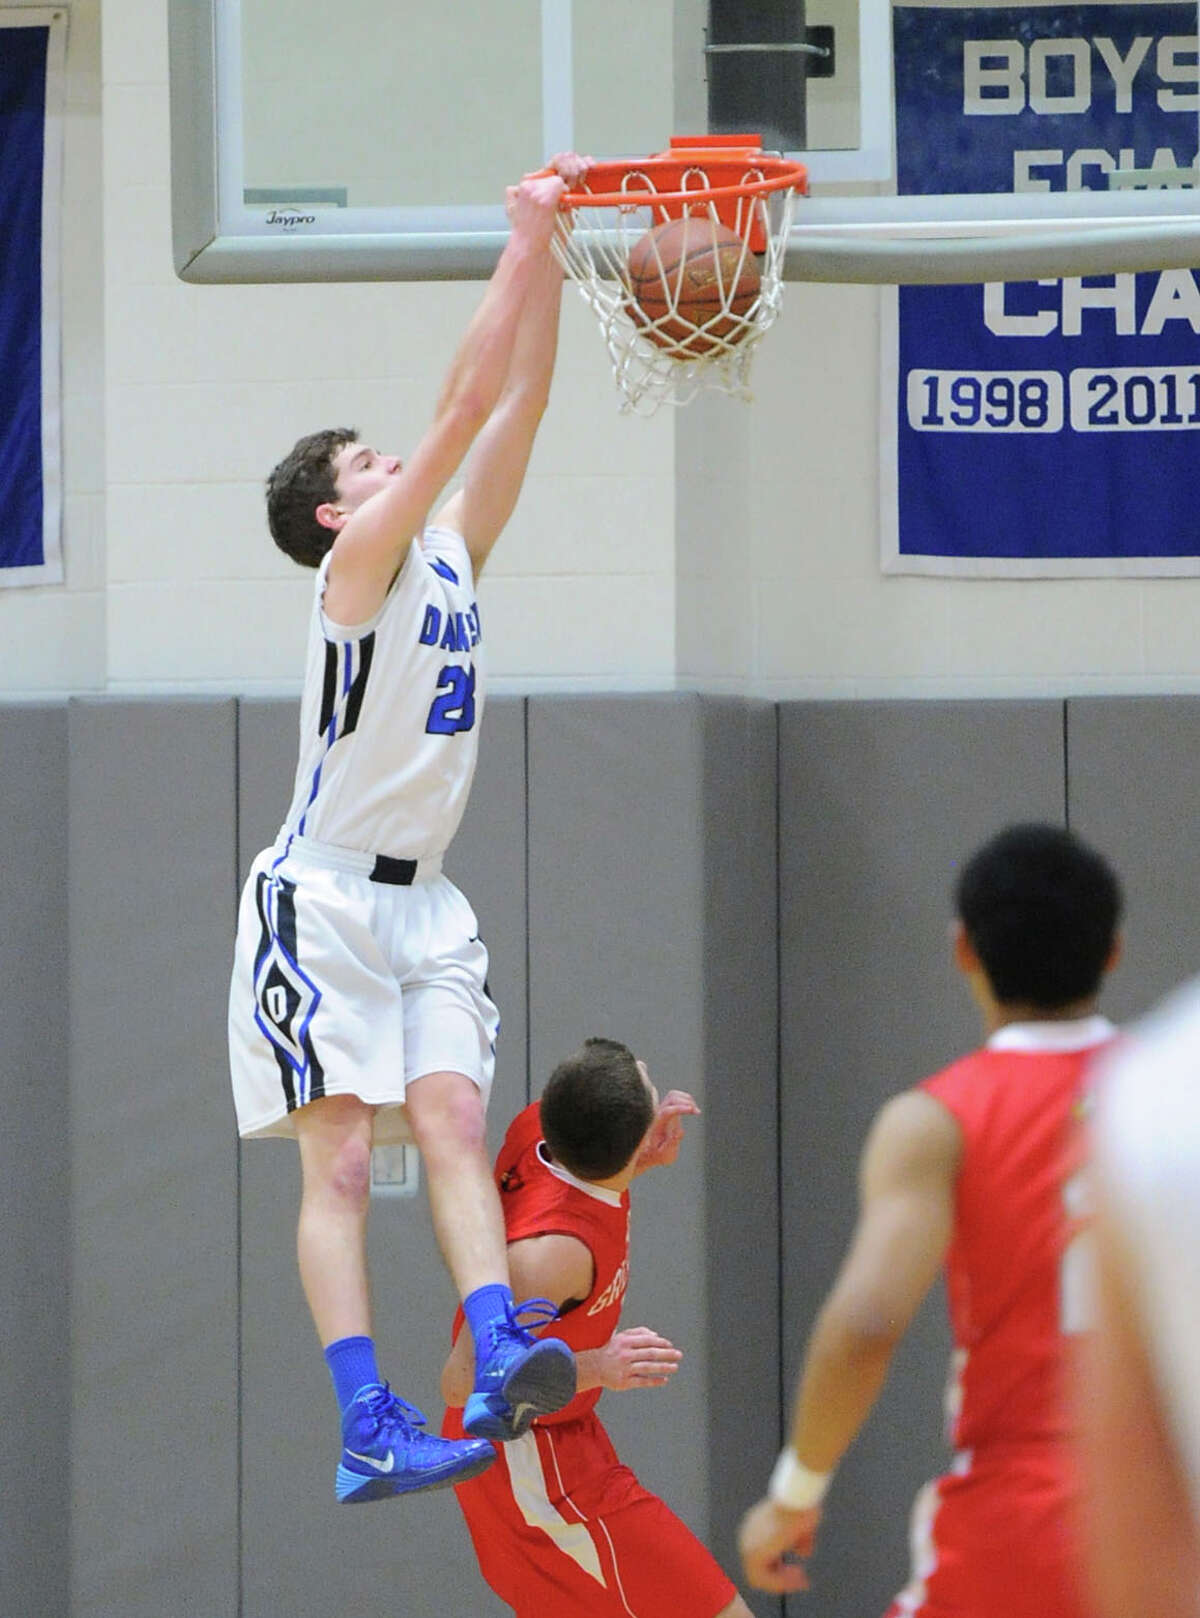 At left, Hudson Hamill (#23) of Darien dunks the ball on Tommy Povinelli of Greenwich during the boys high school basketball game between Darien High School and Greenwich High School at Darien, Friday night, Jan. 31, 2014.